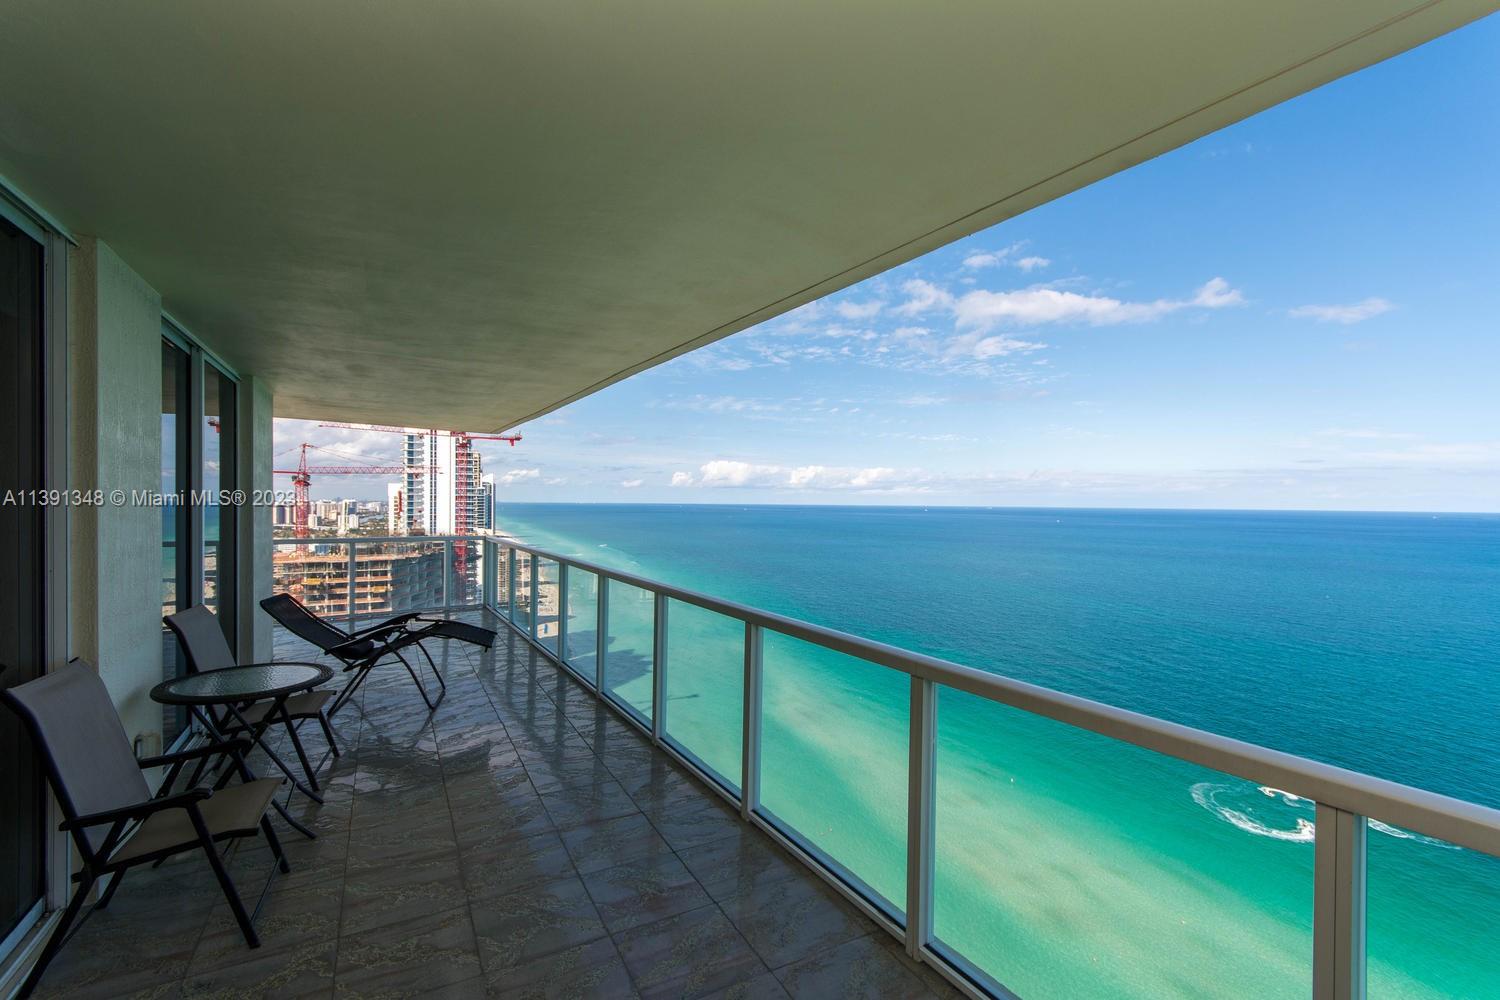 Property for Sale at 16699 Collins Ave 4103, Sunny Isles Beach, Miami-Dade County, Florida - Bedrooms: 2 
Bathrooms: 3  - $1,549,000